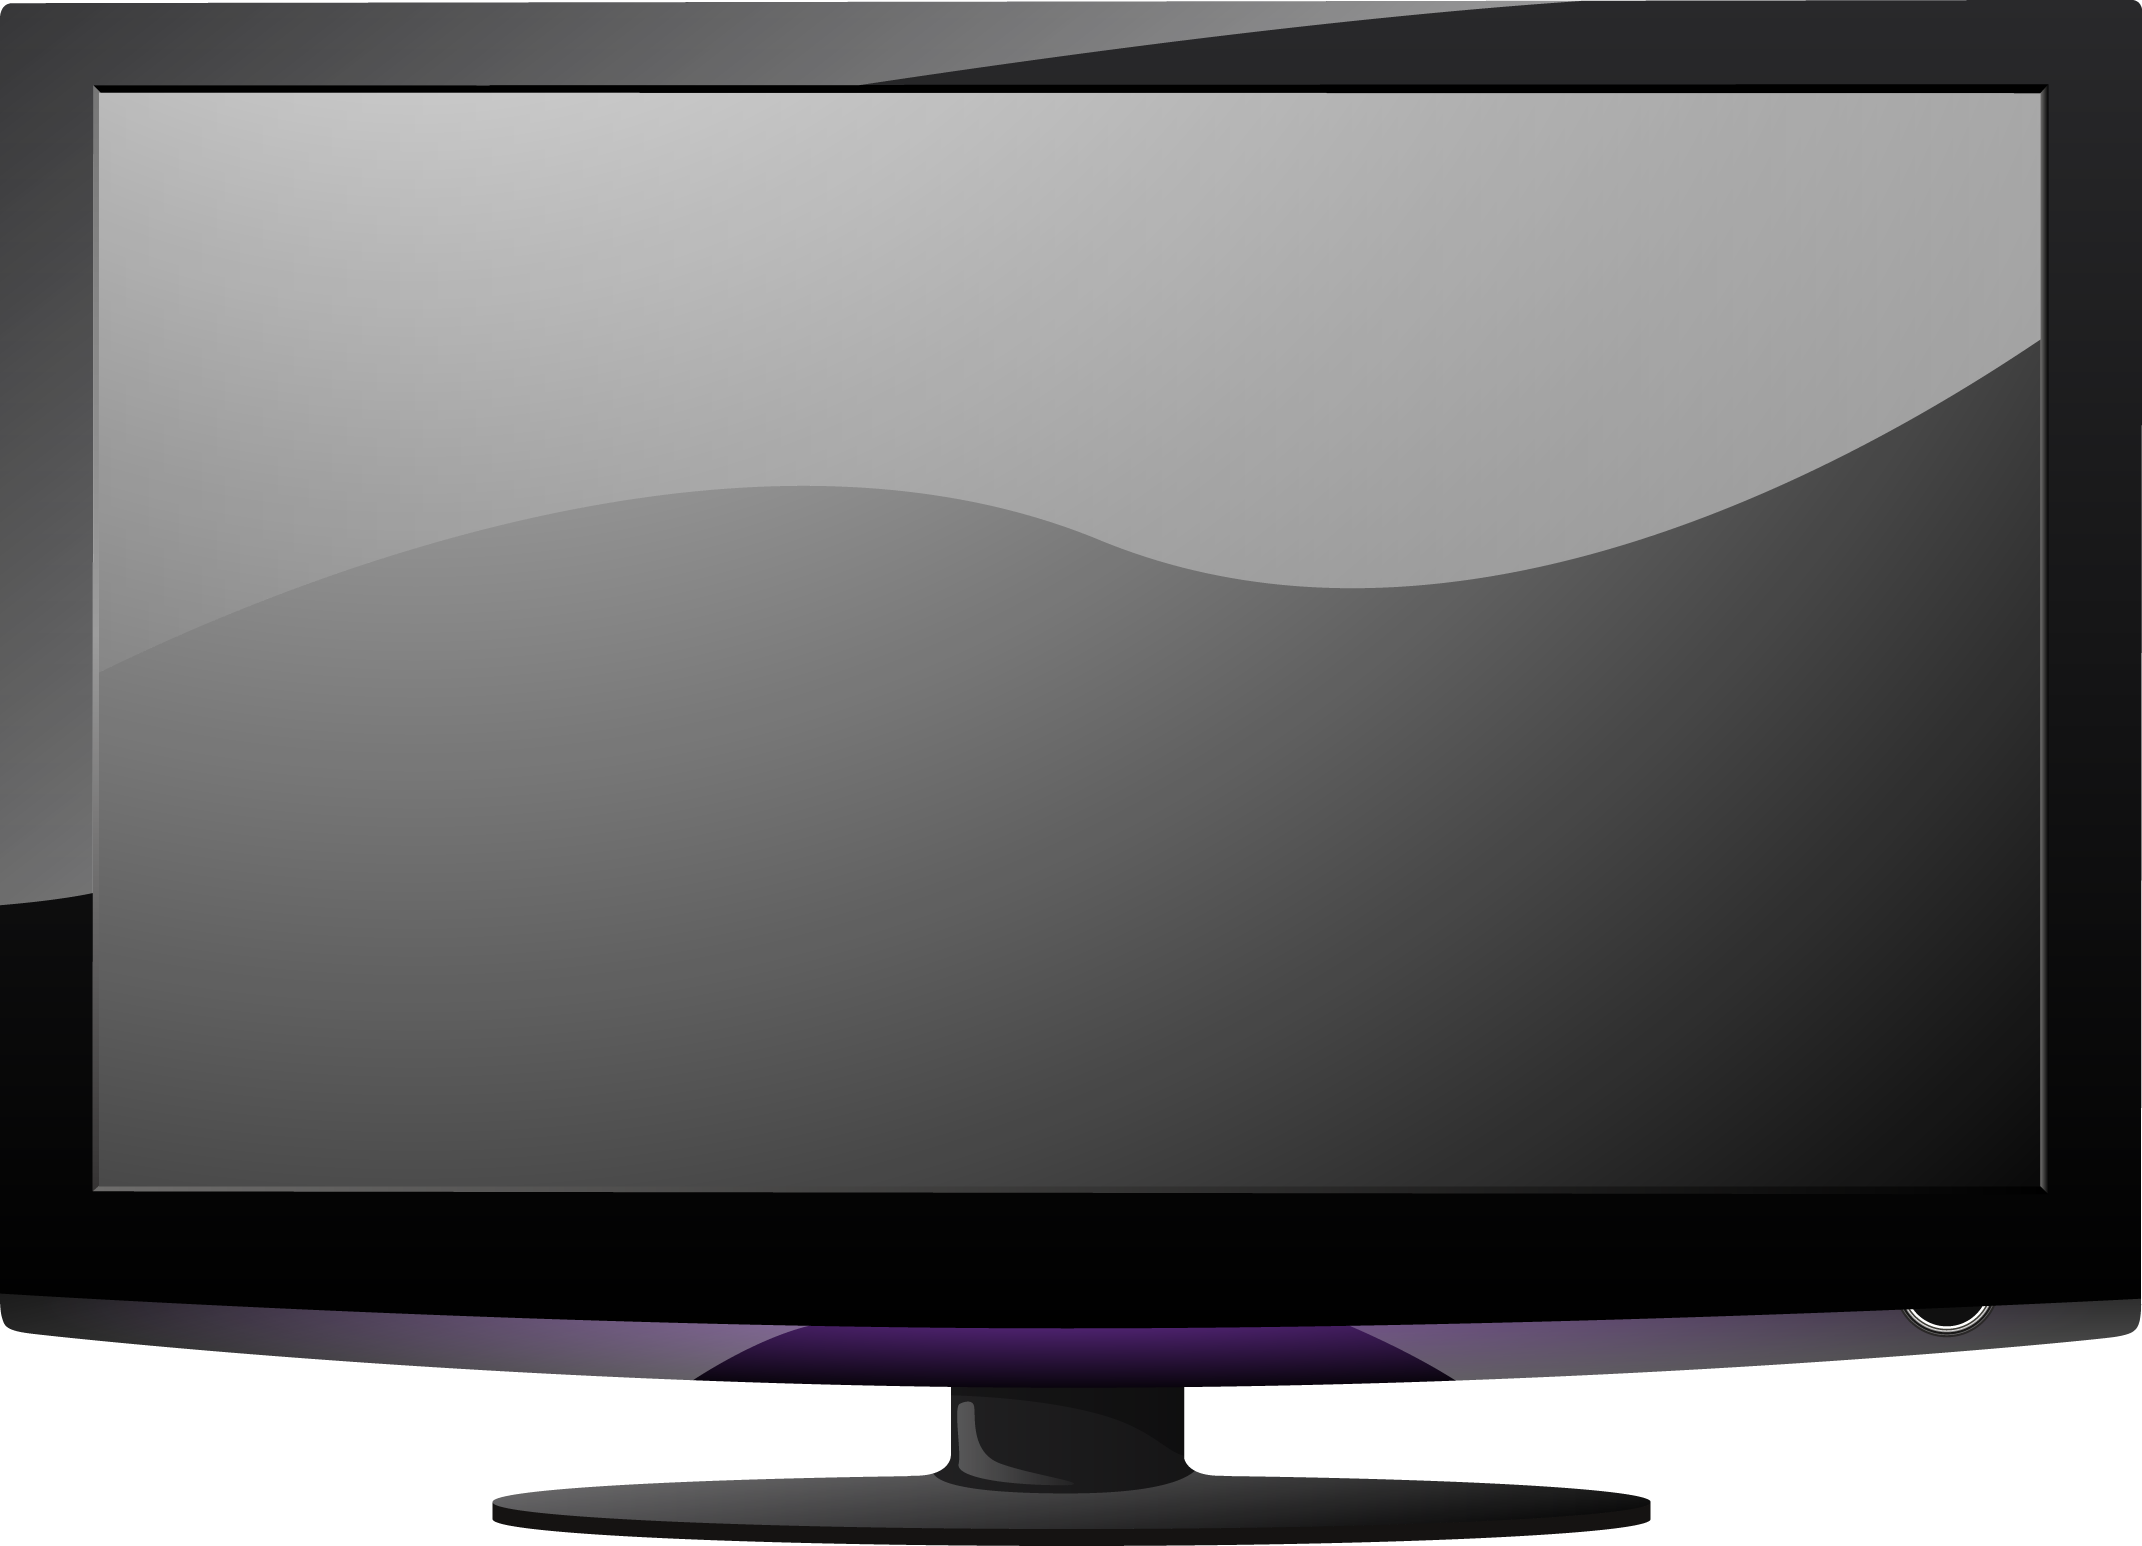 Lcd Television Png Transparent Picture Png Svg Clip Art For Web